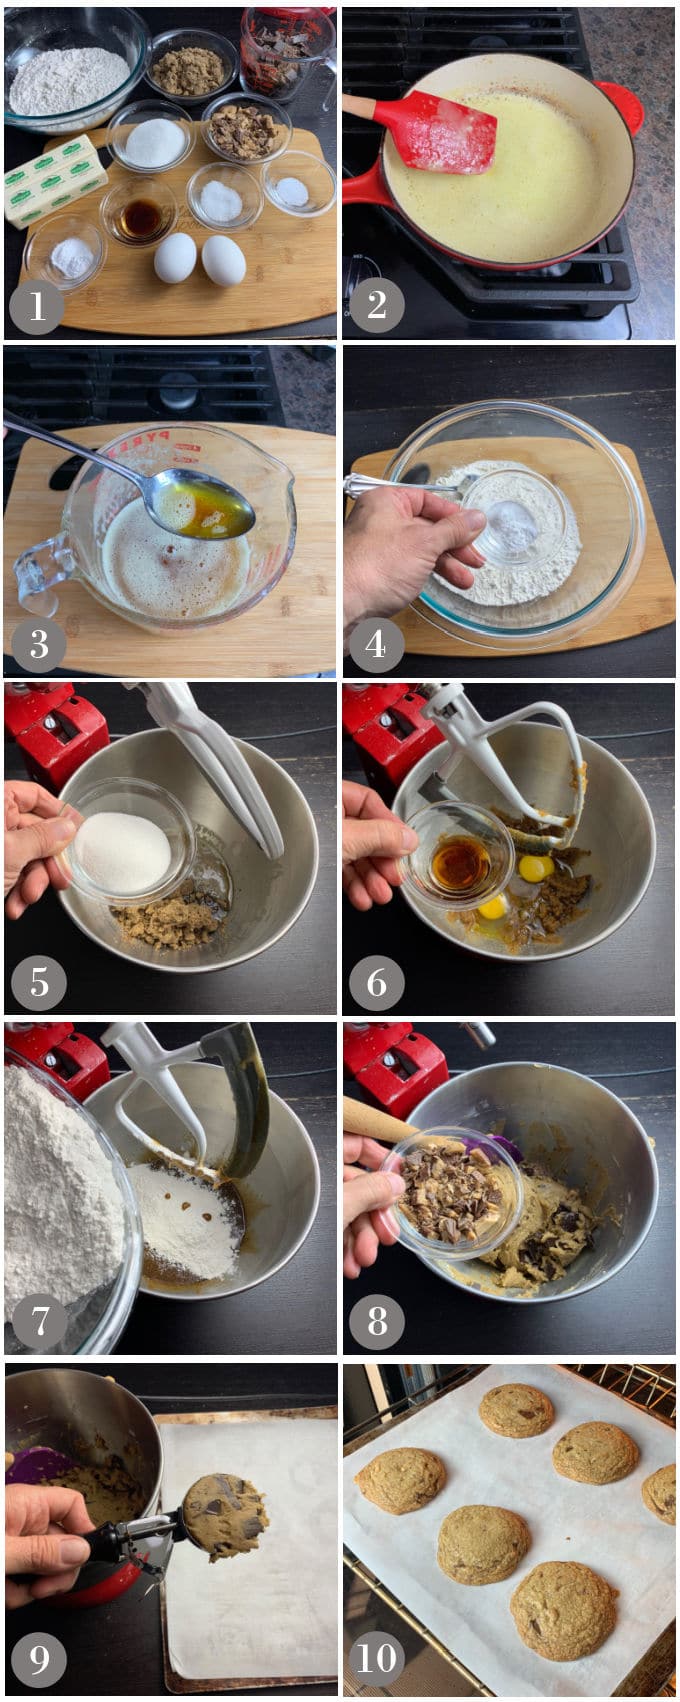 A collage of photos showing the steps to make English toffee brown butter chocolate chip cookies.